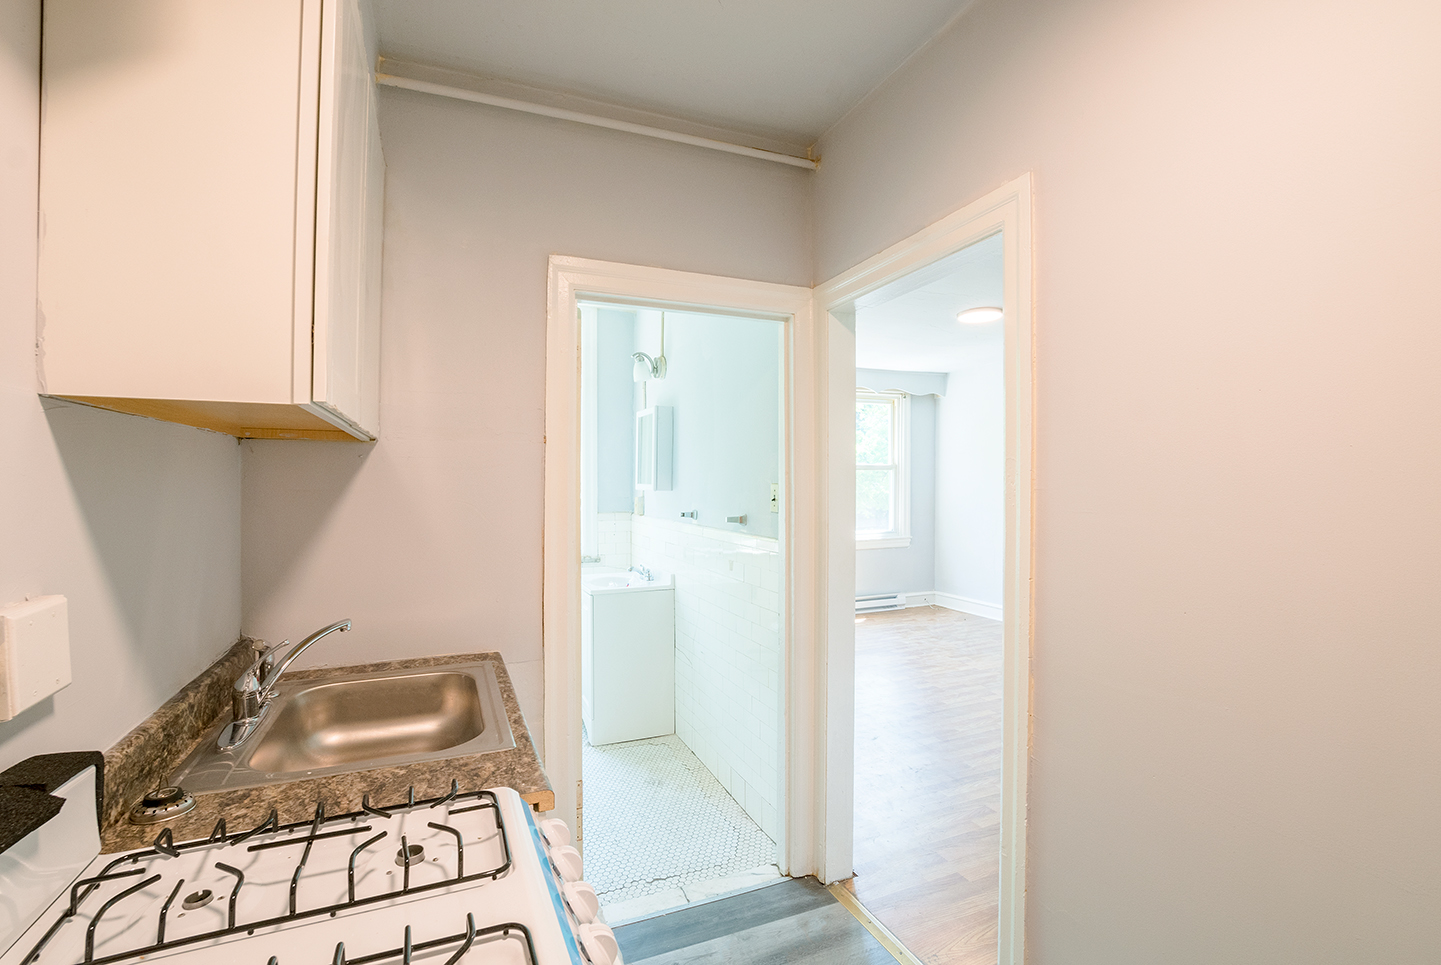 Property Photo For 2115 N. 63rd St, Unit 3E